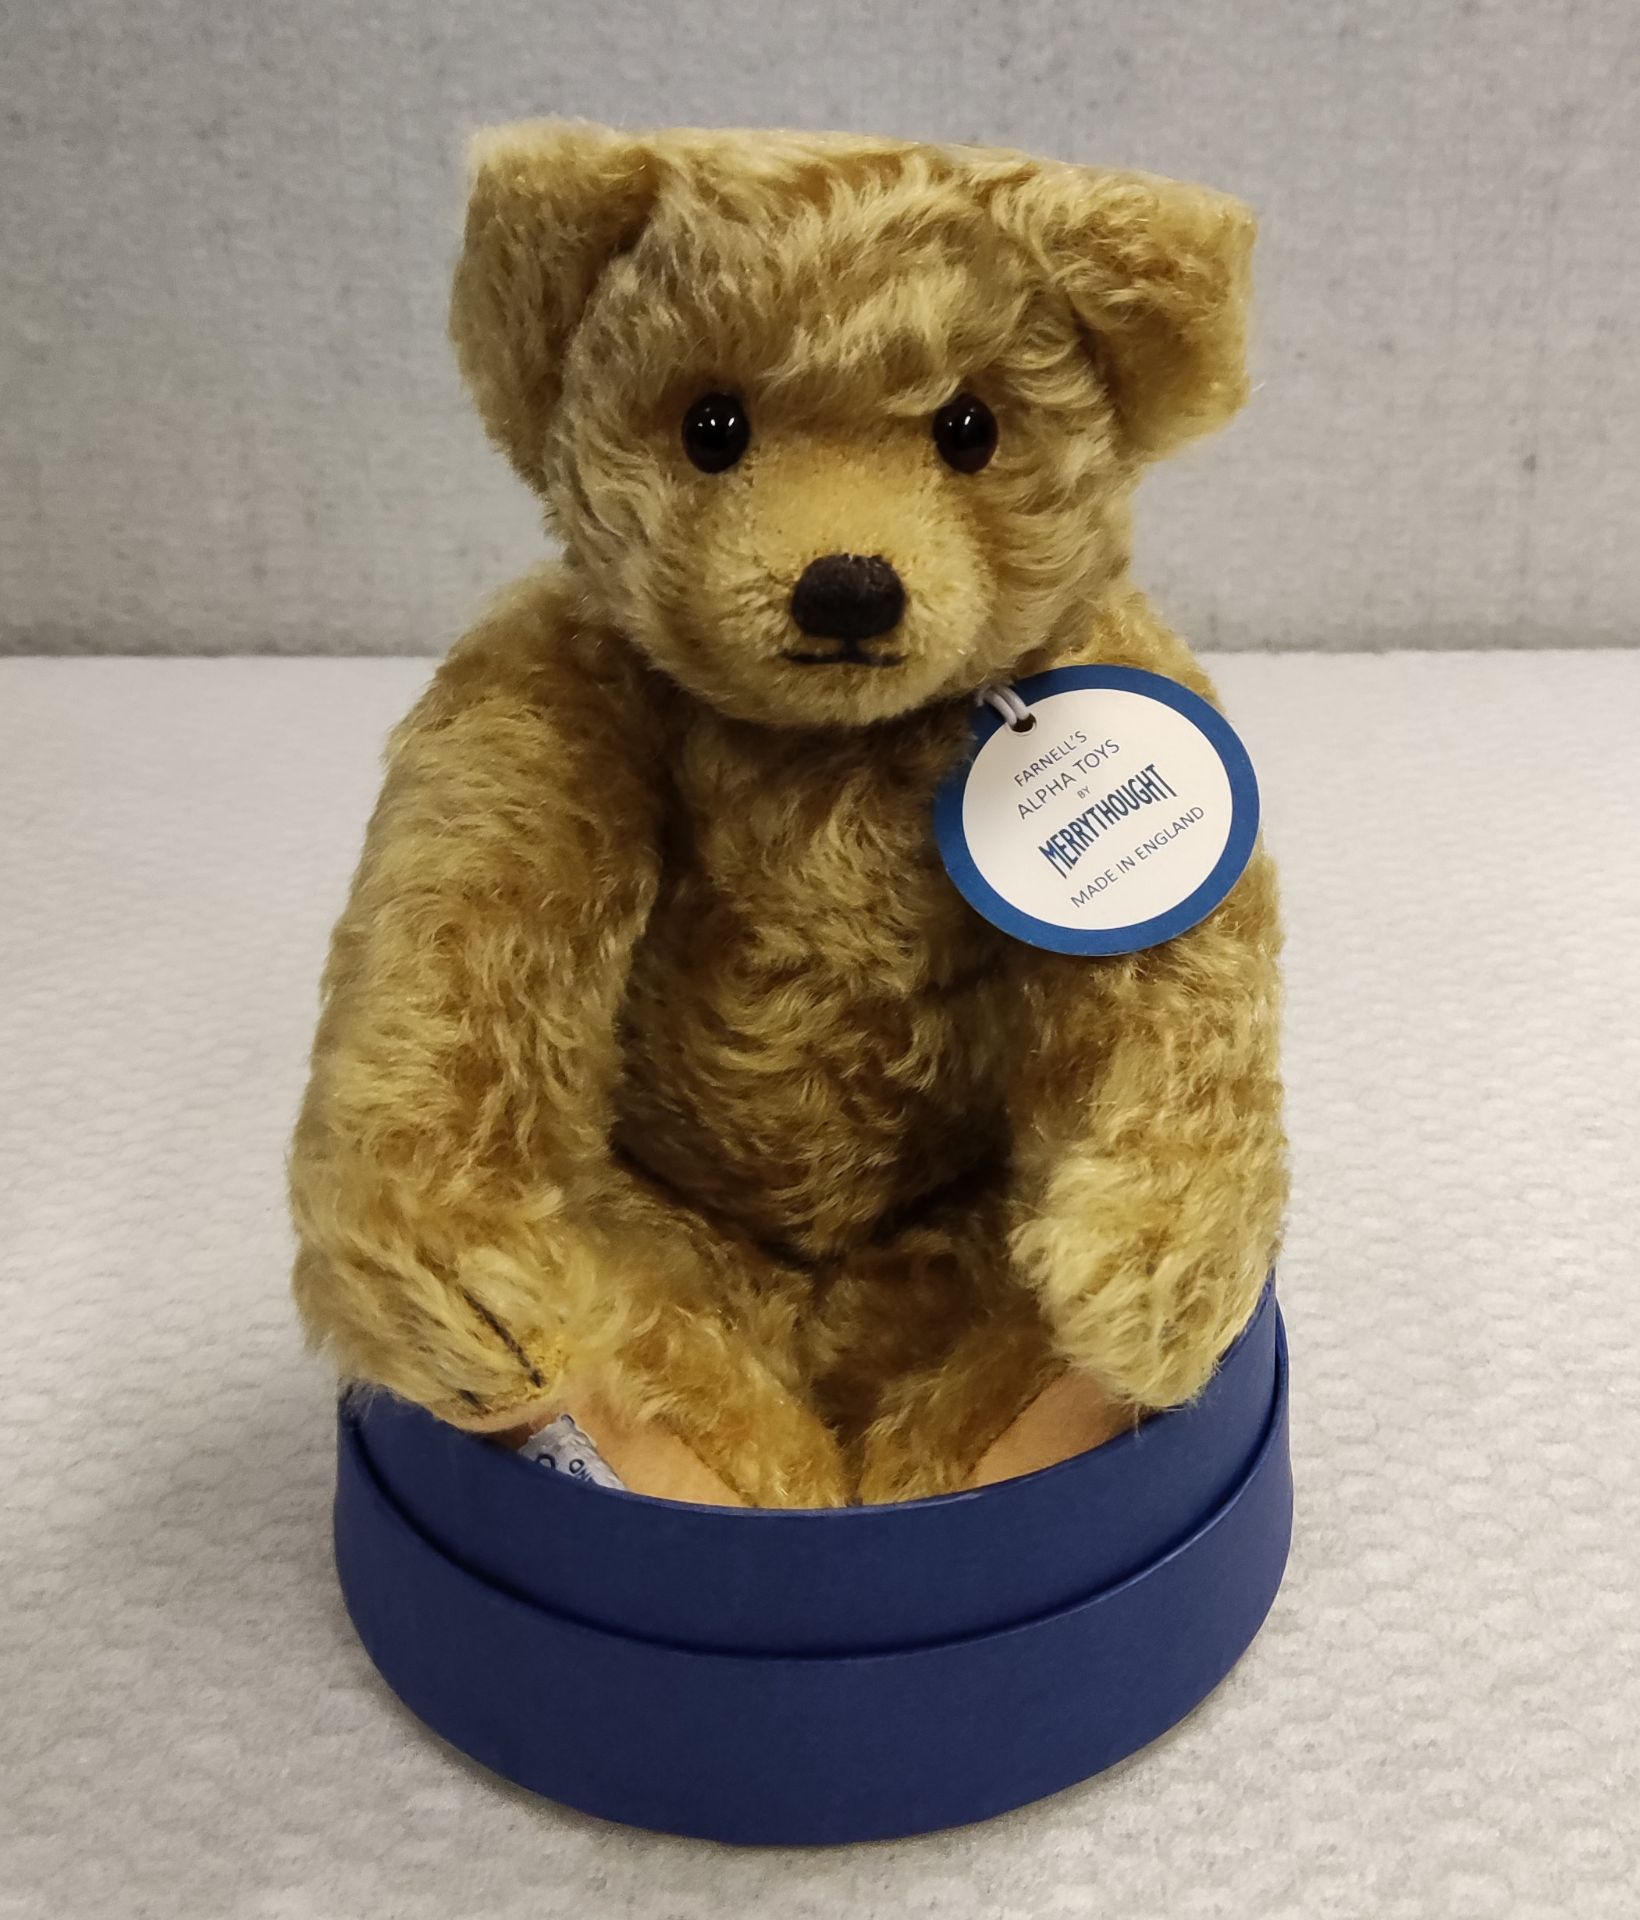 1 x Farnell's Alpha Toys/Merrythought Christopher Robin's Little Edward Teddy Bear - New/Boxed - Image 5 of 12